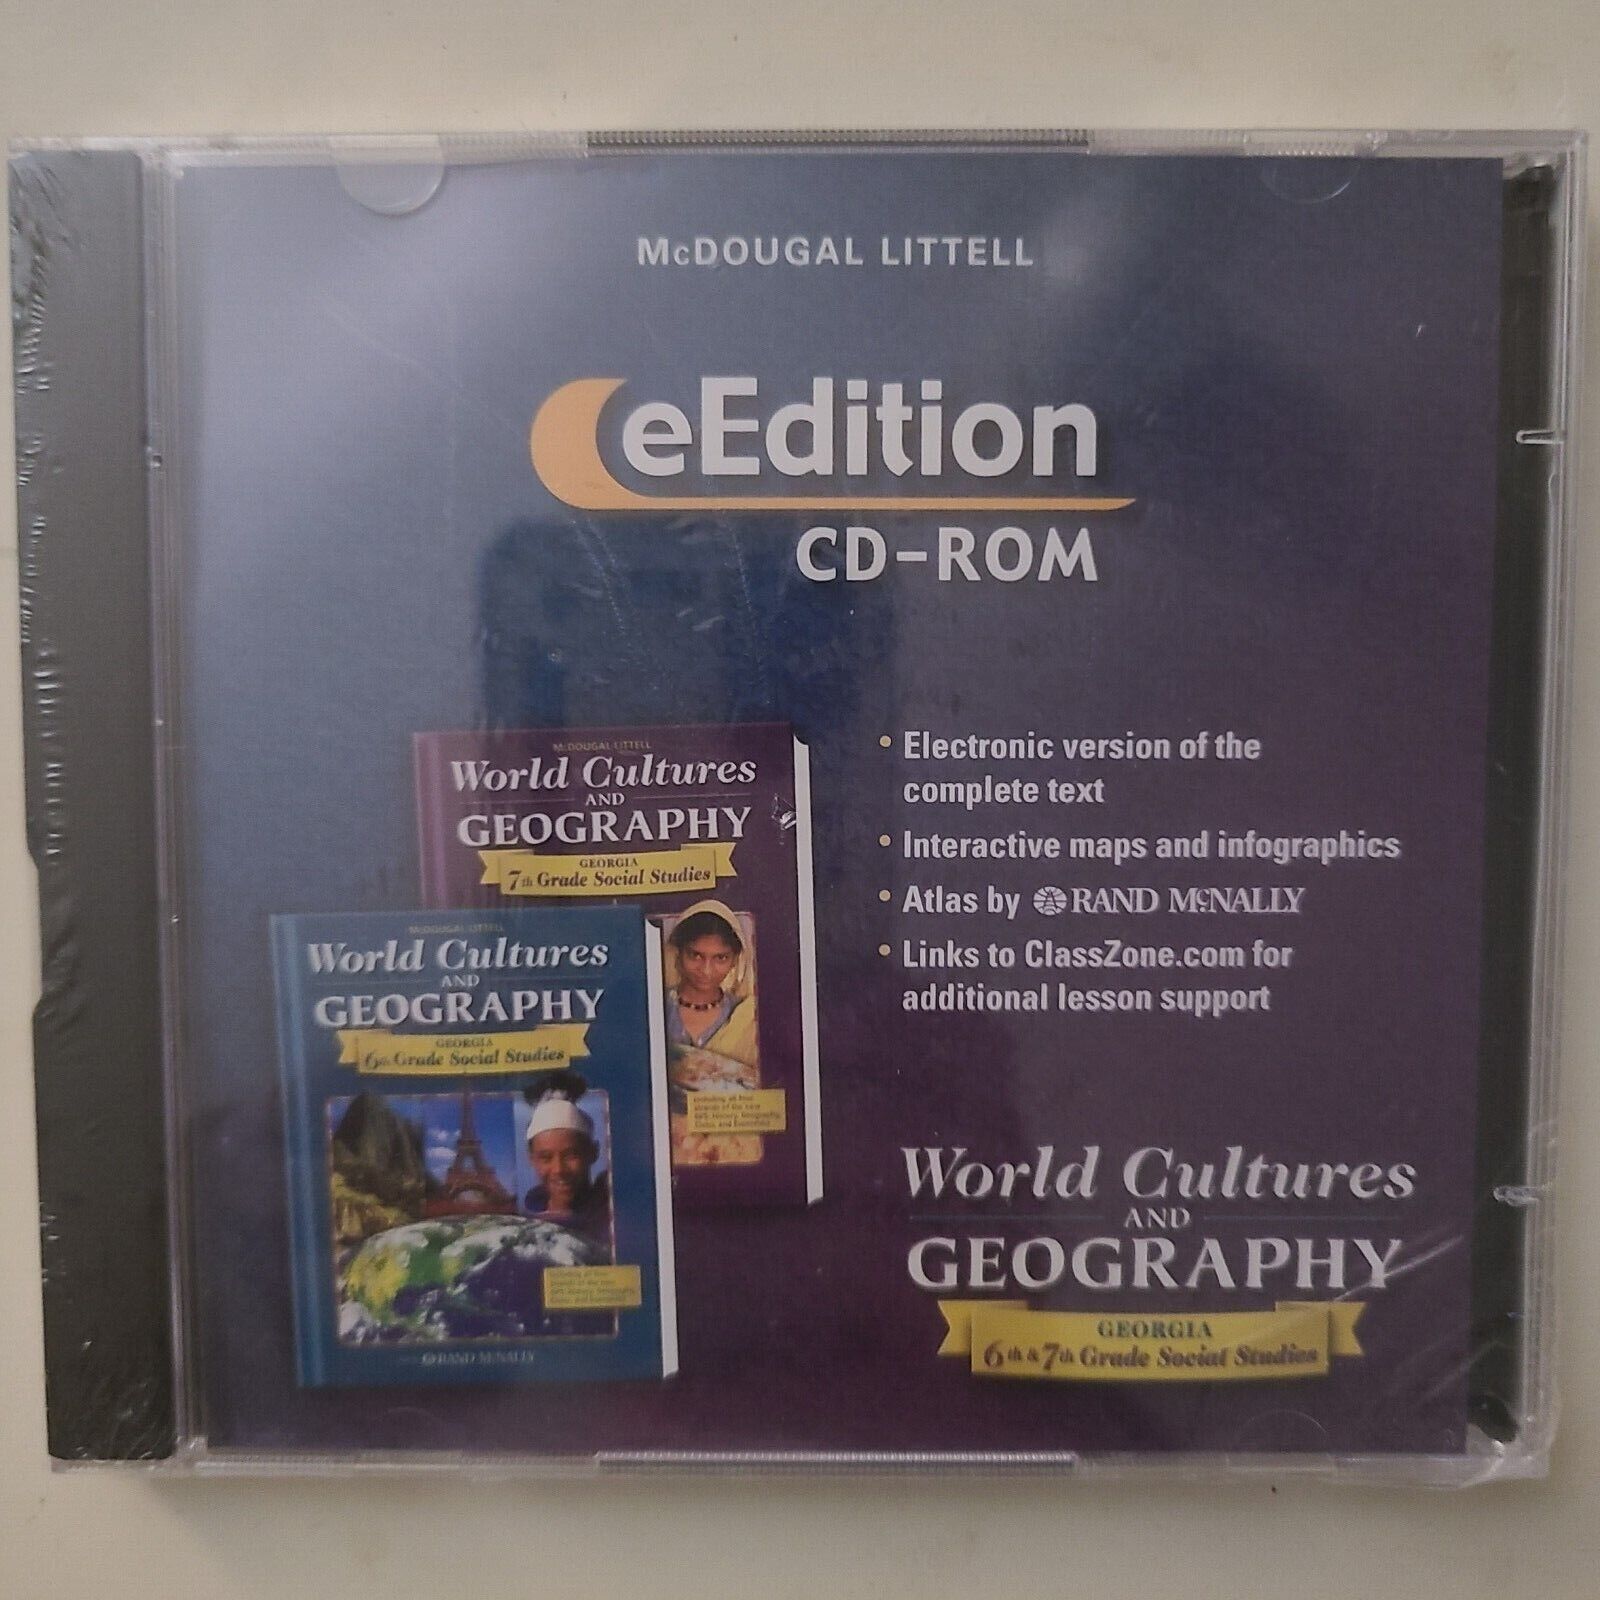 WORLD CULTURES and GEOGRAPHY eEDITION CD-Rom, GEORGIA GR 6-7~ SEALED